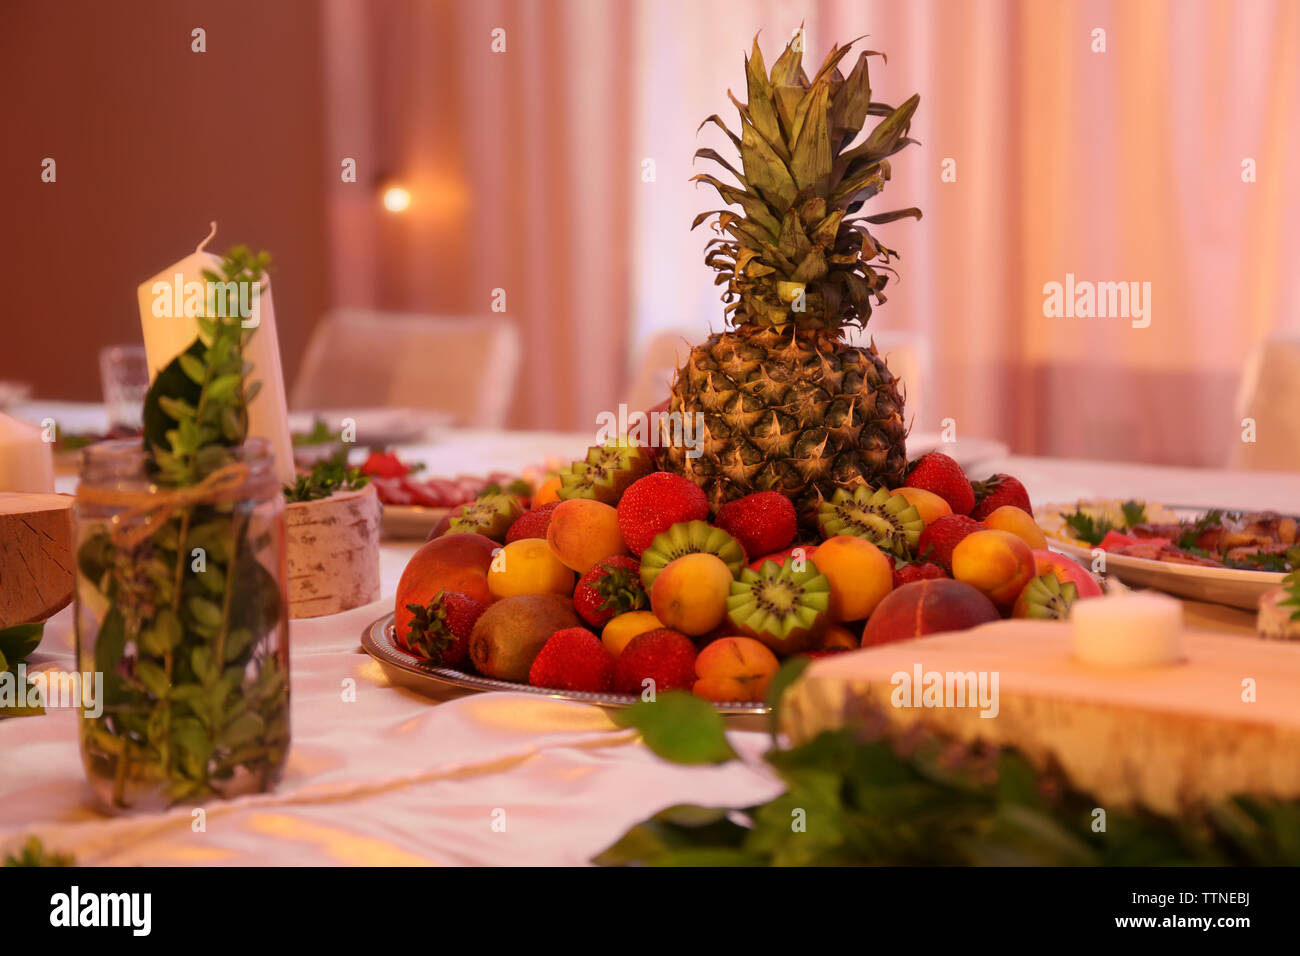 Wedding dinner table with fruits on plate in restaurant Stock Photo - Alamy